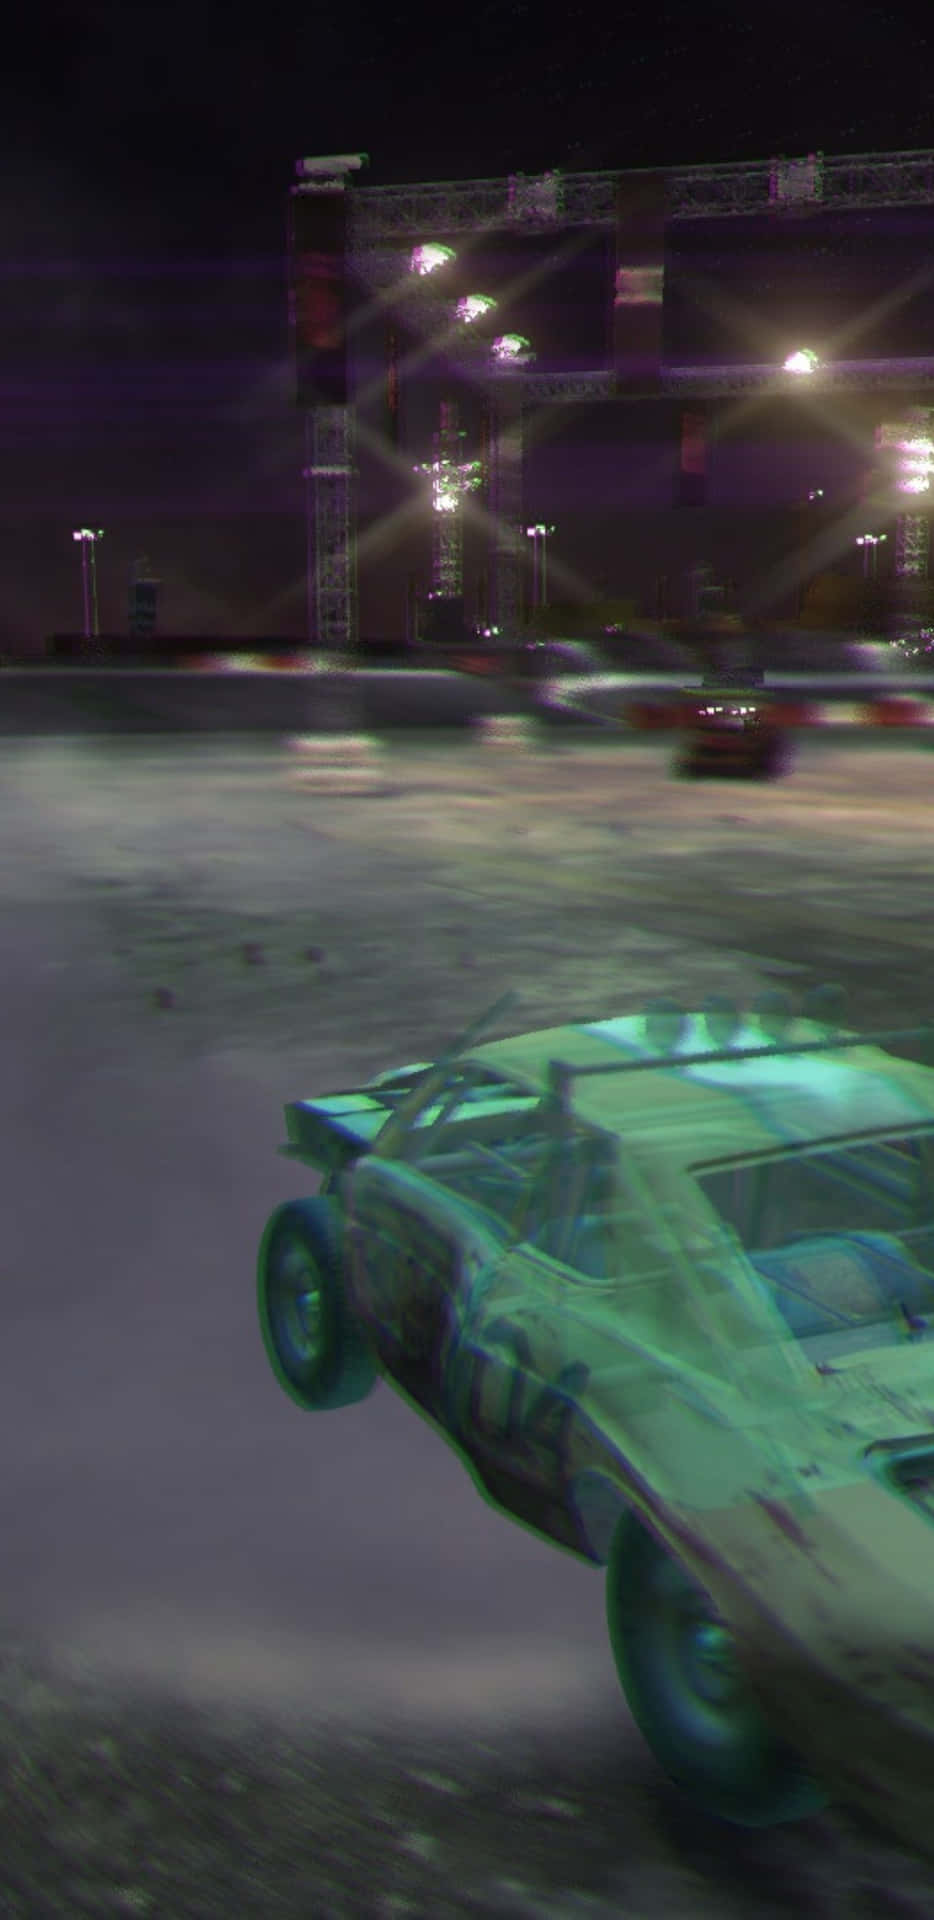 A Car Driving On A Dirt Track At Night